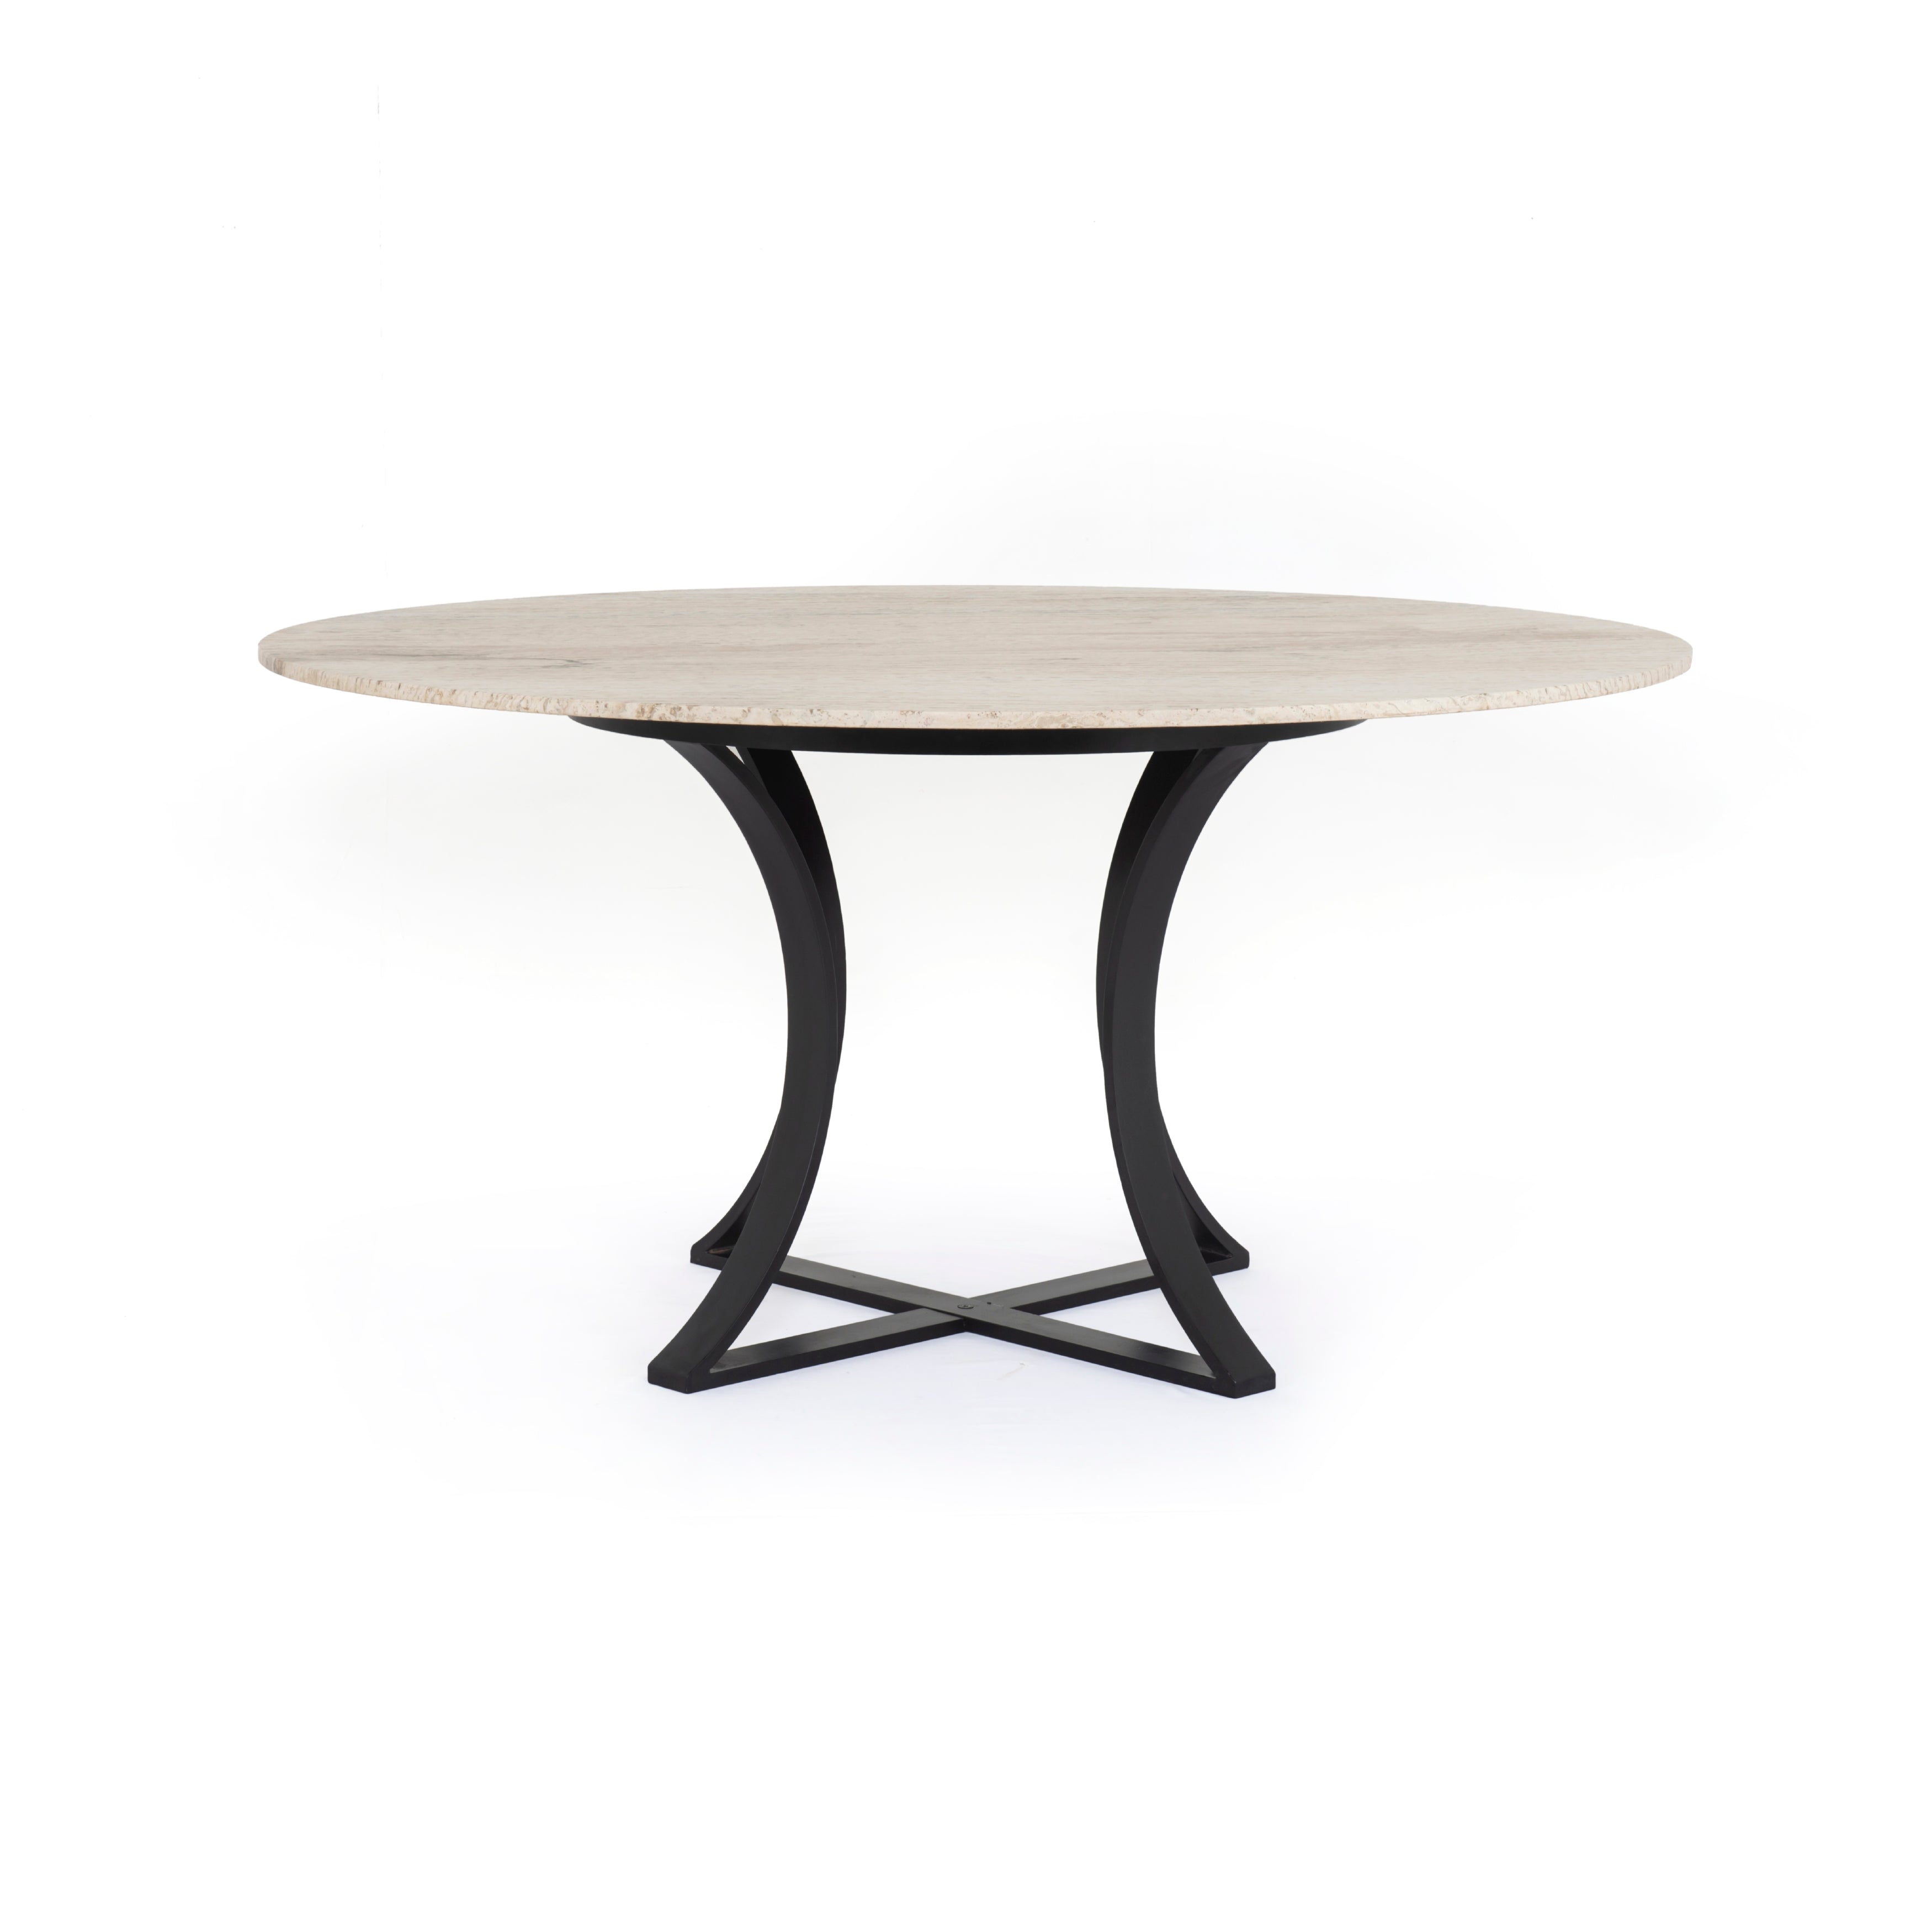 Natural materials take a cue from modern geometry with this Gage Dining Table - White Travertine. Black-finished iron forms unique angles to balance a contrasting tabletop of beautiful white travertine. Seats six to eight comfortably.